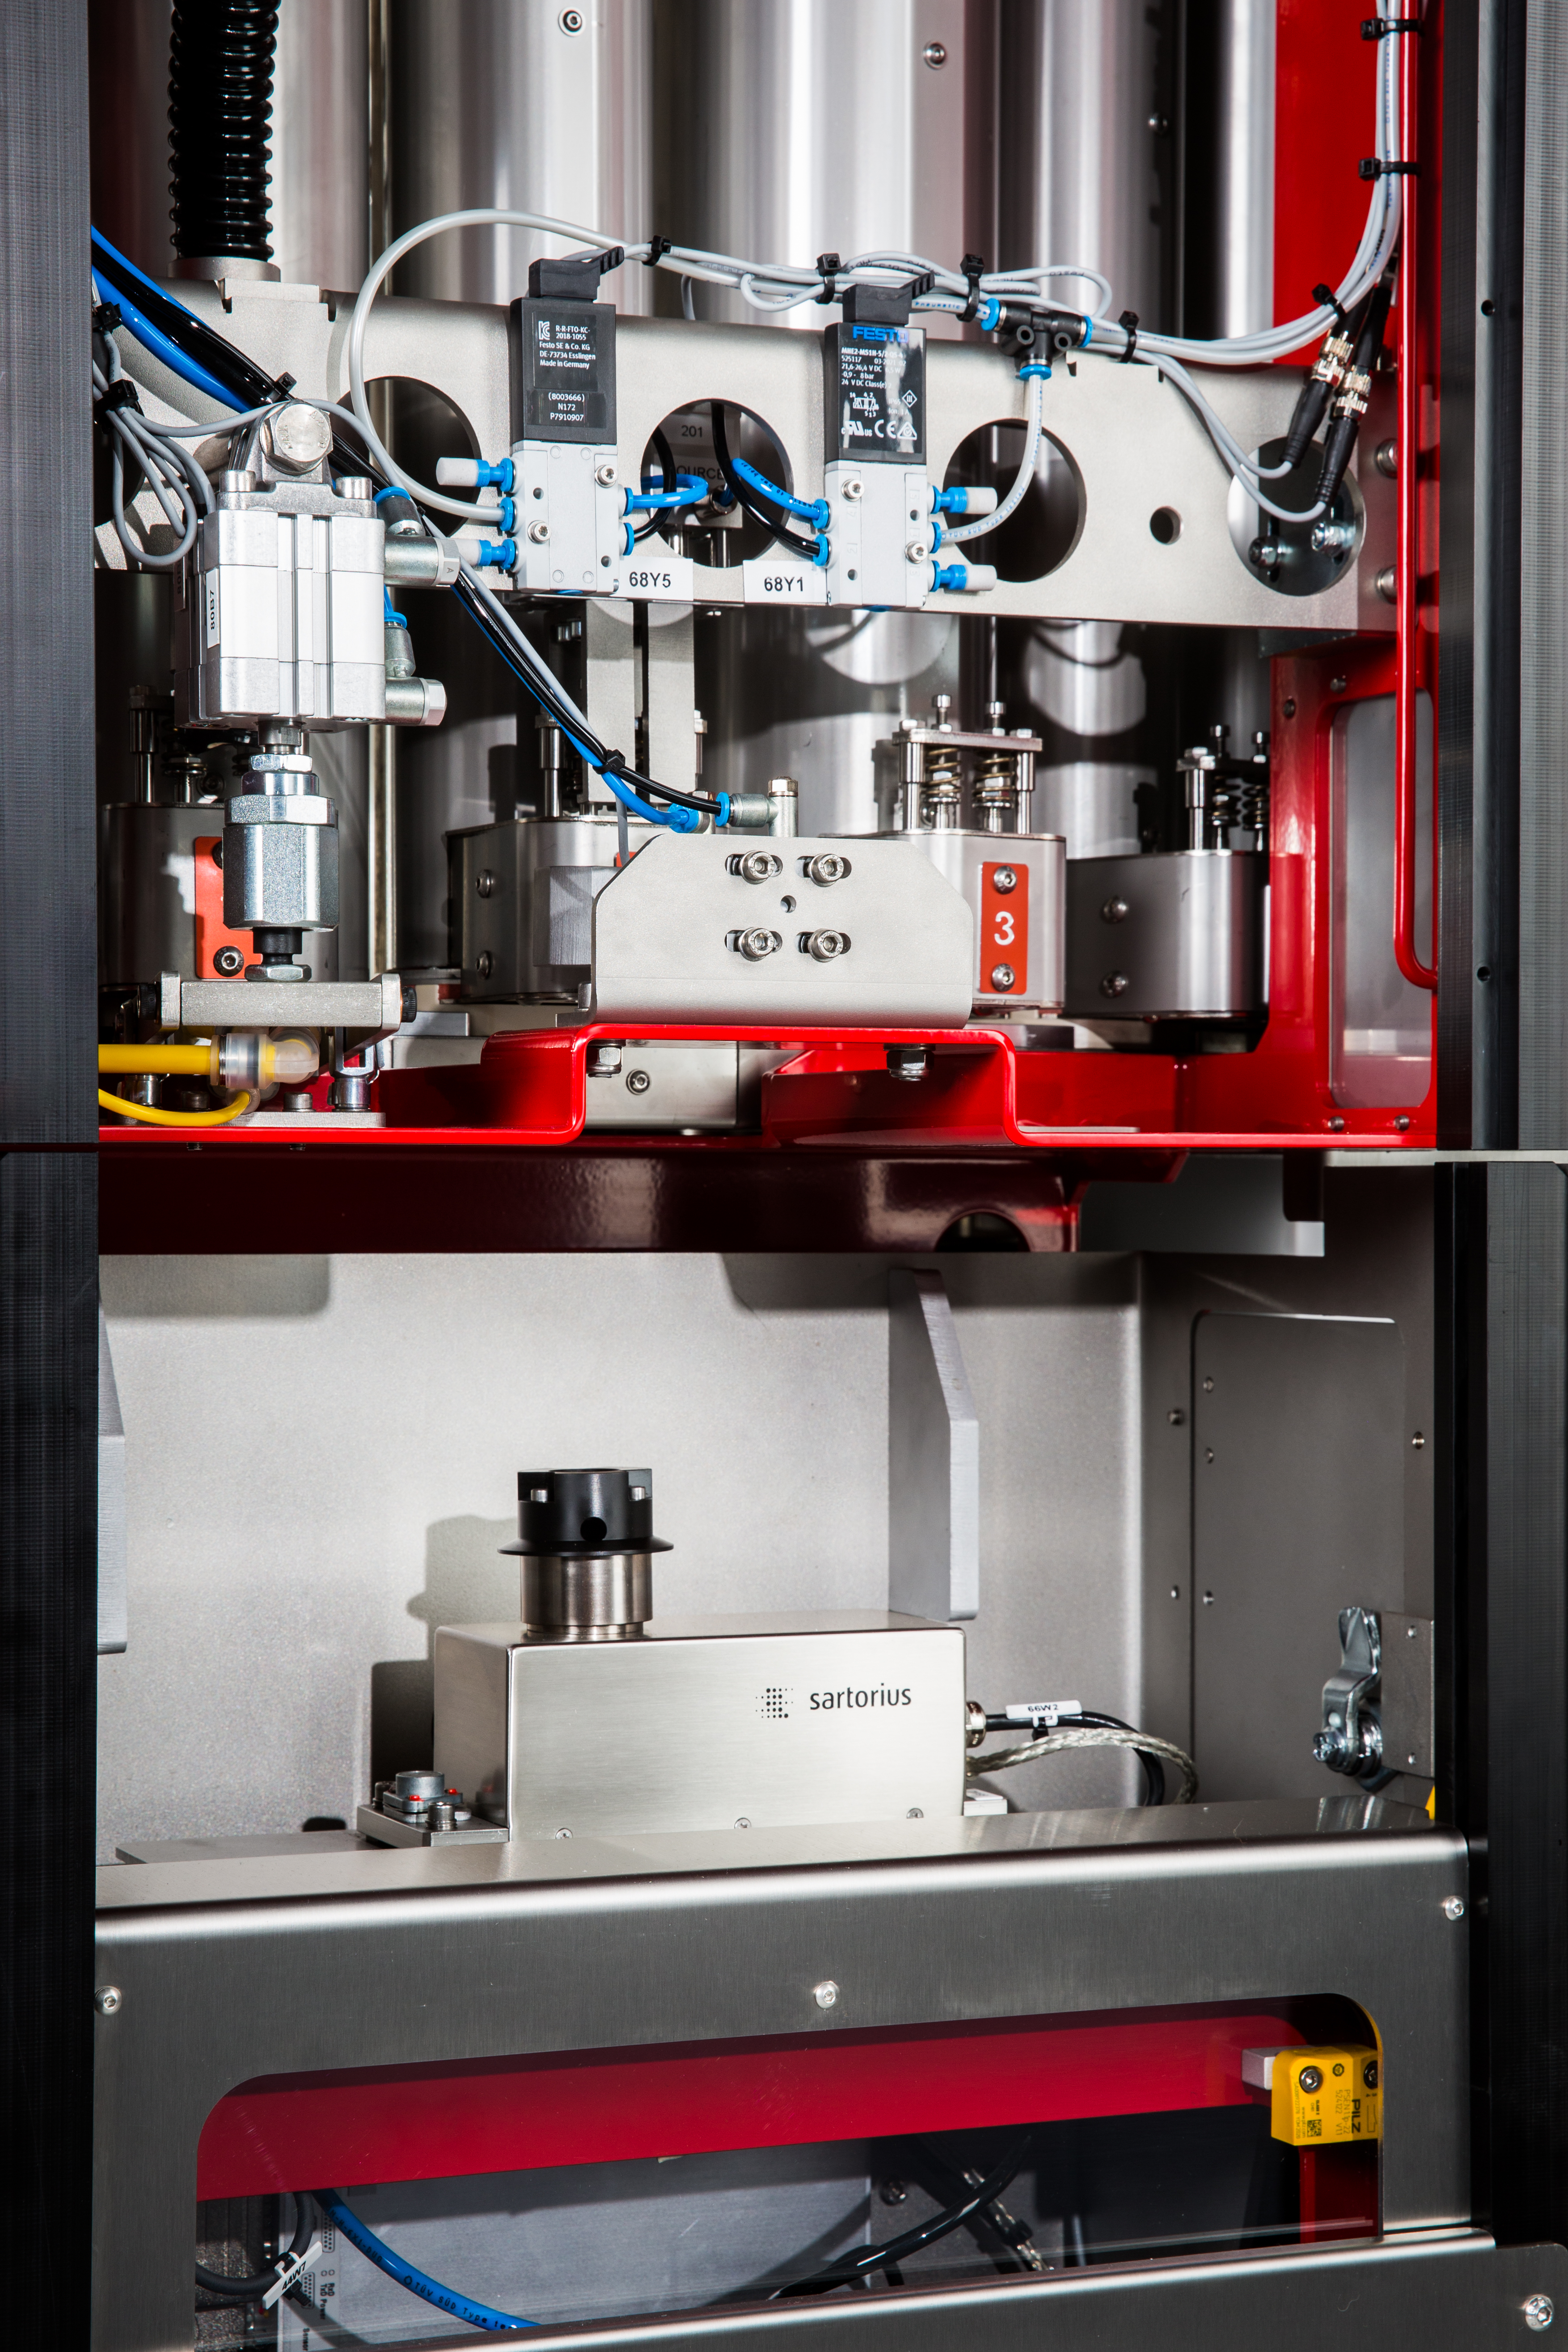 MicroDispenser MD - Gravimetric dispensing machine for small quantities with an extremely high accuracy - Gemini Techniek - 4